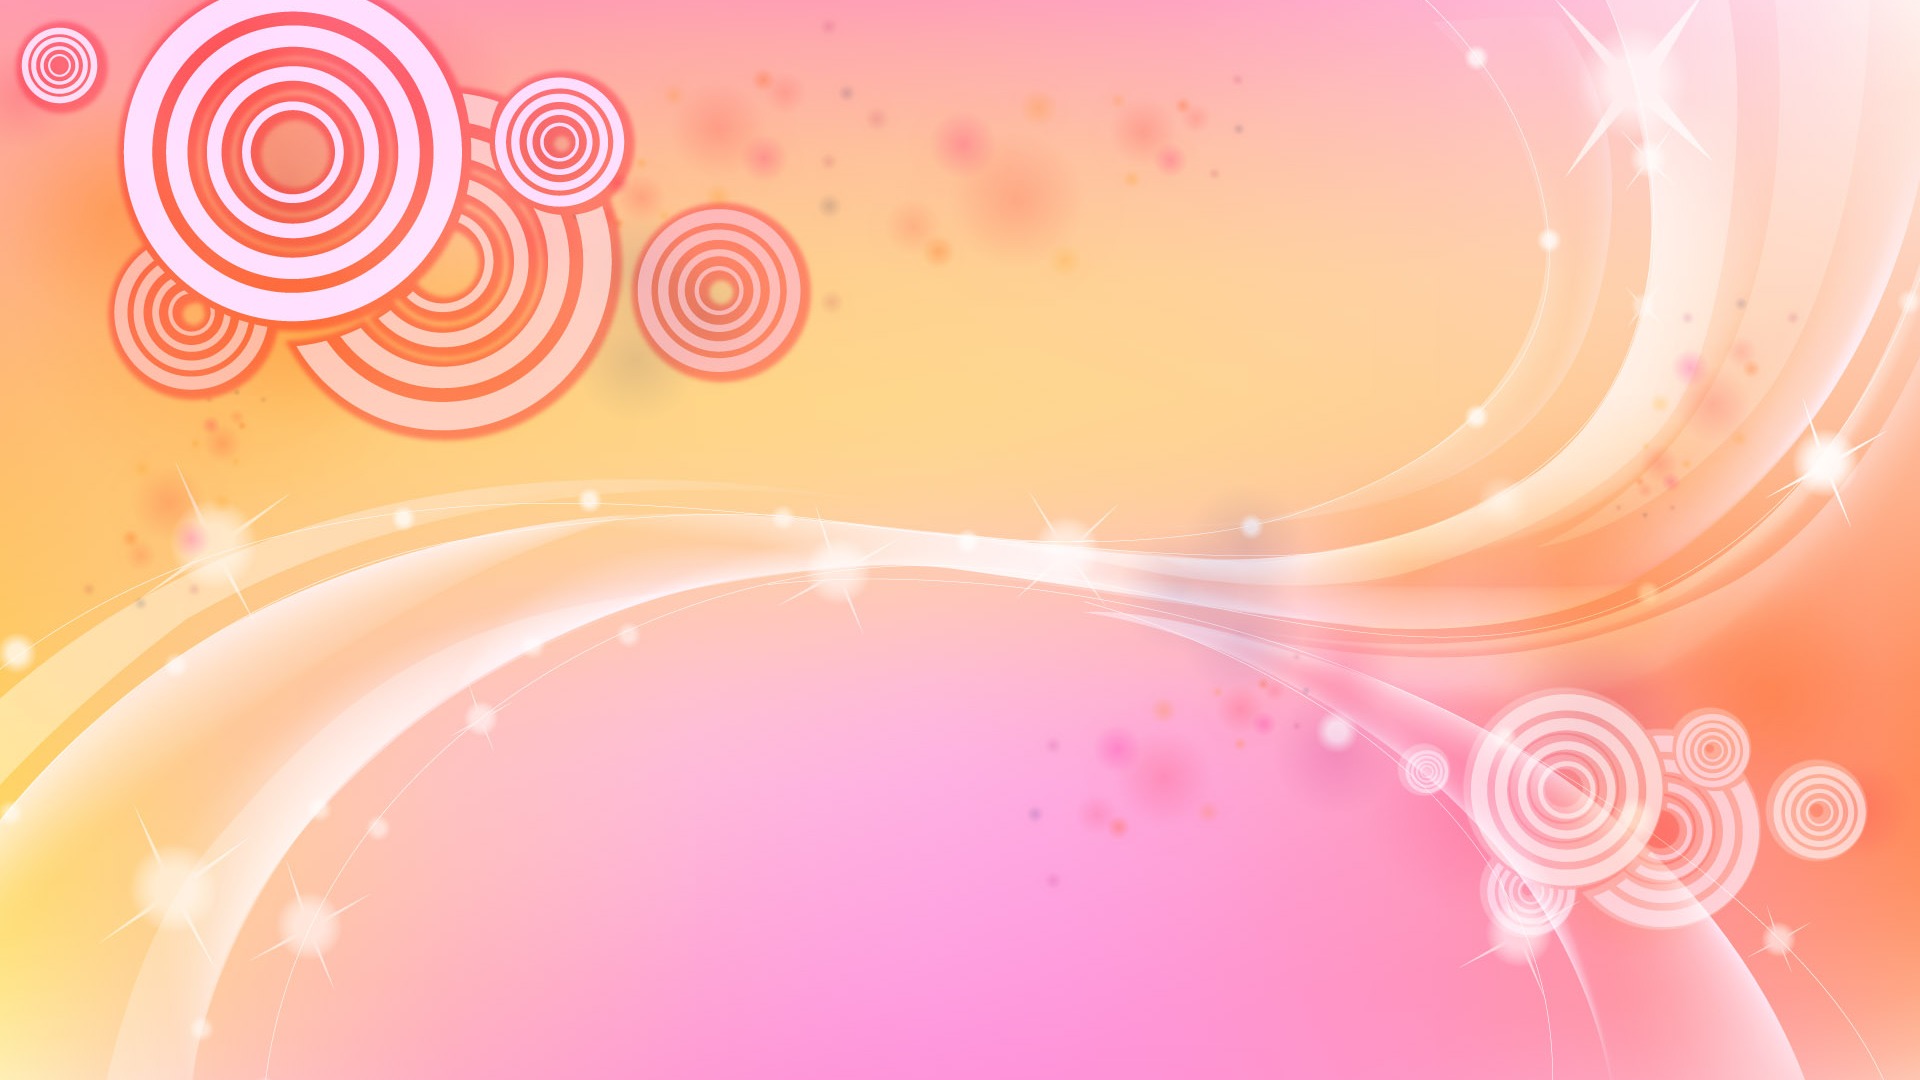 Colorful vector background wallpaper (3) #18 - 1920x1080